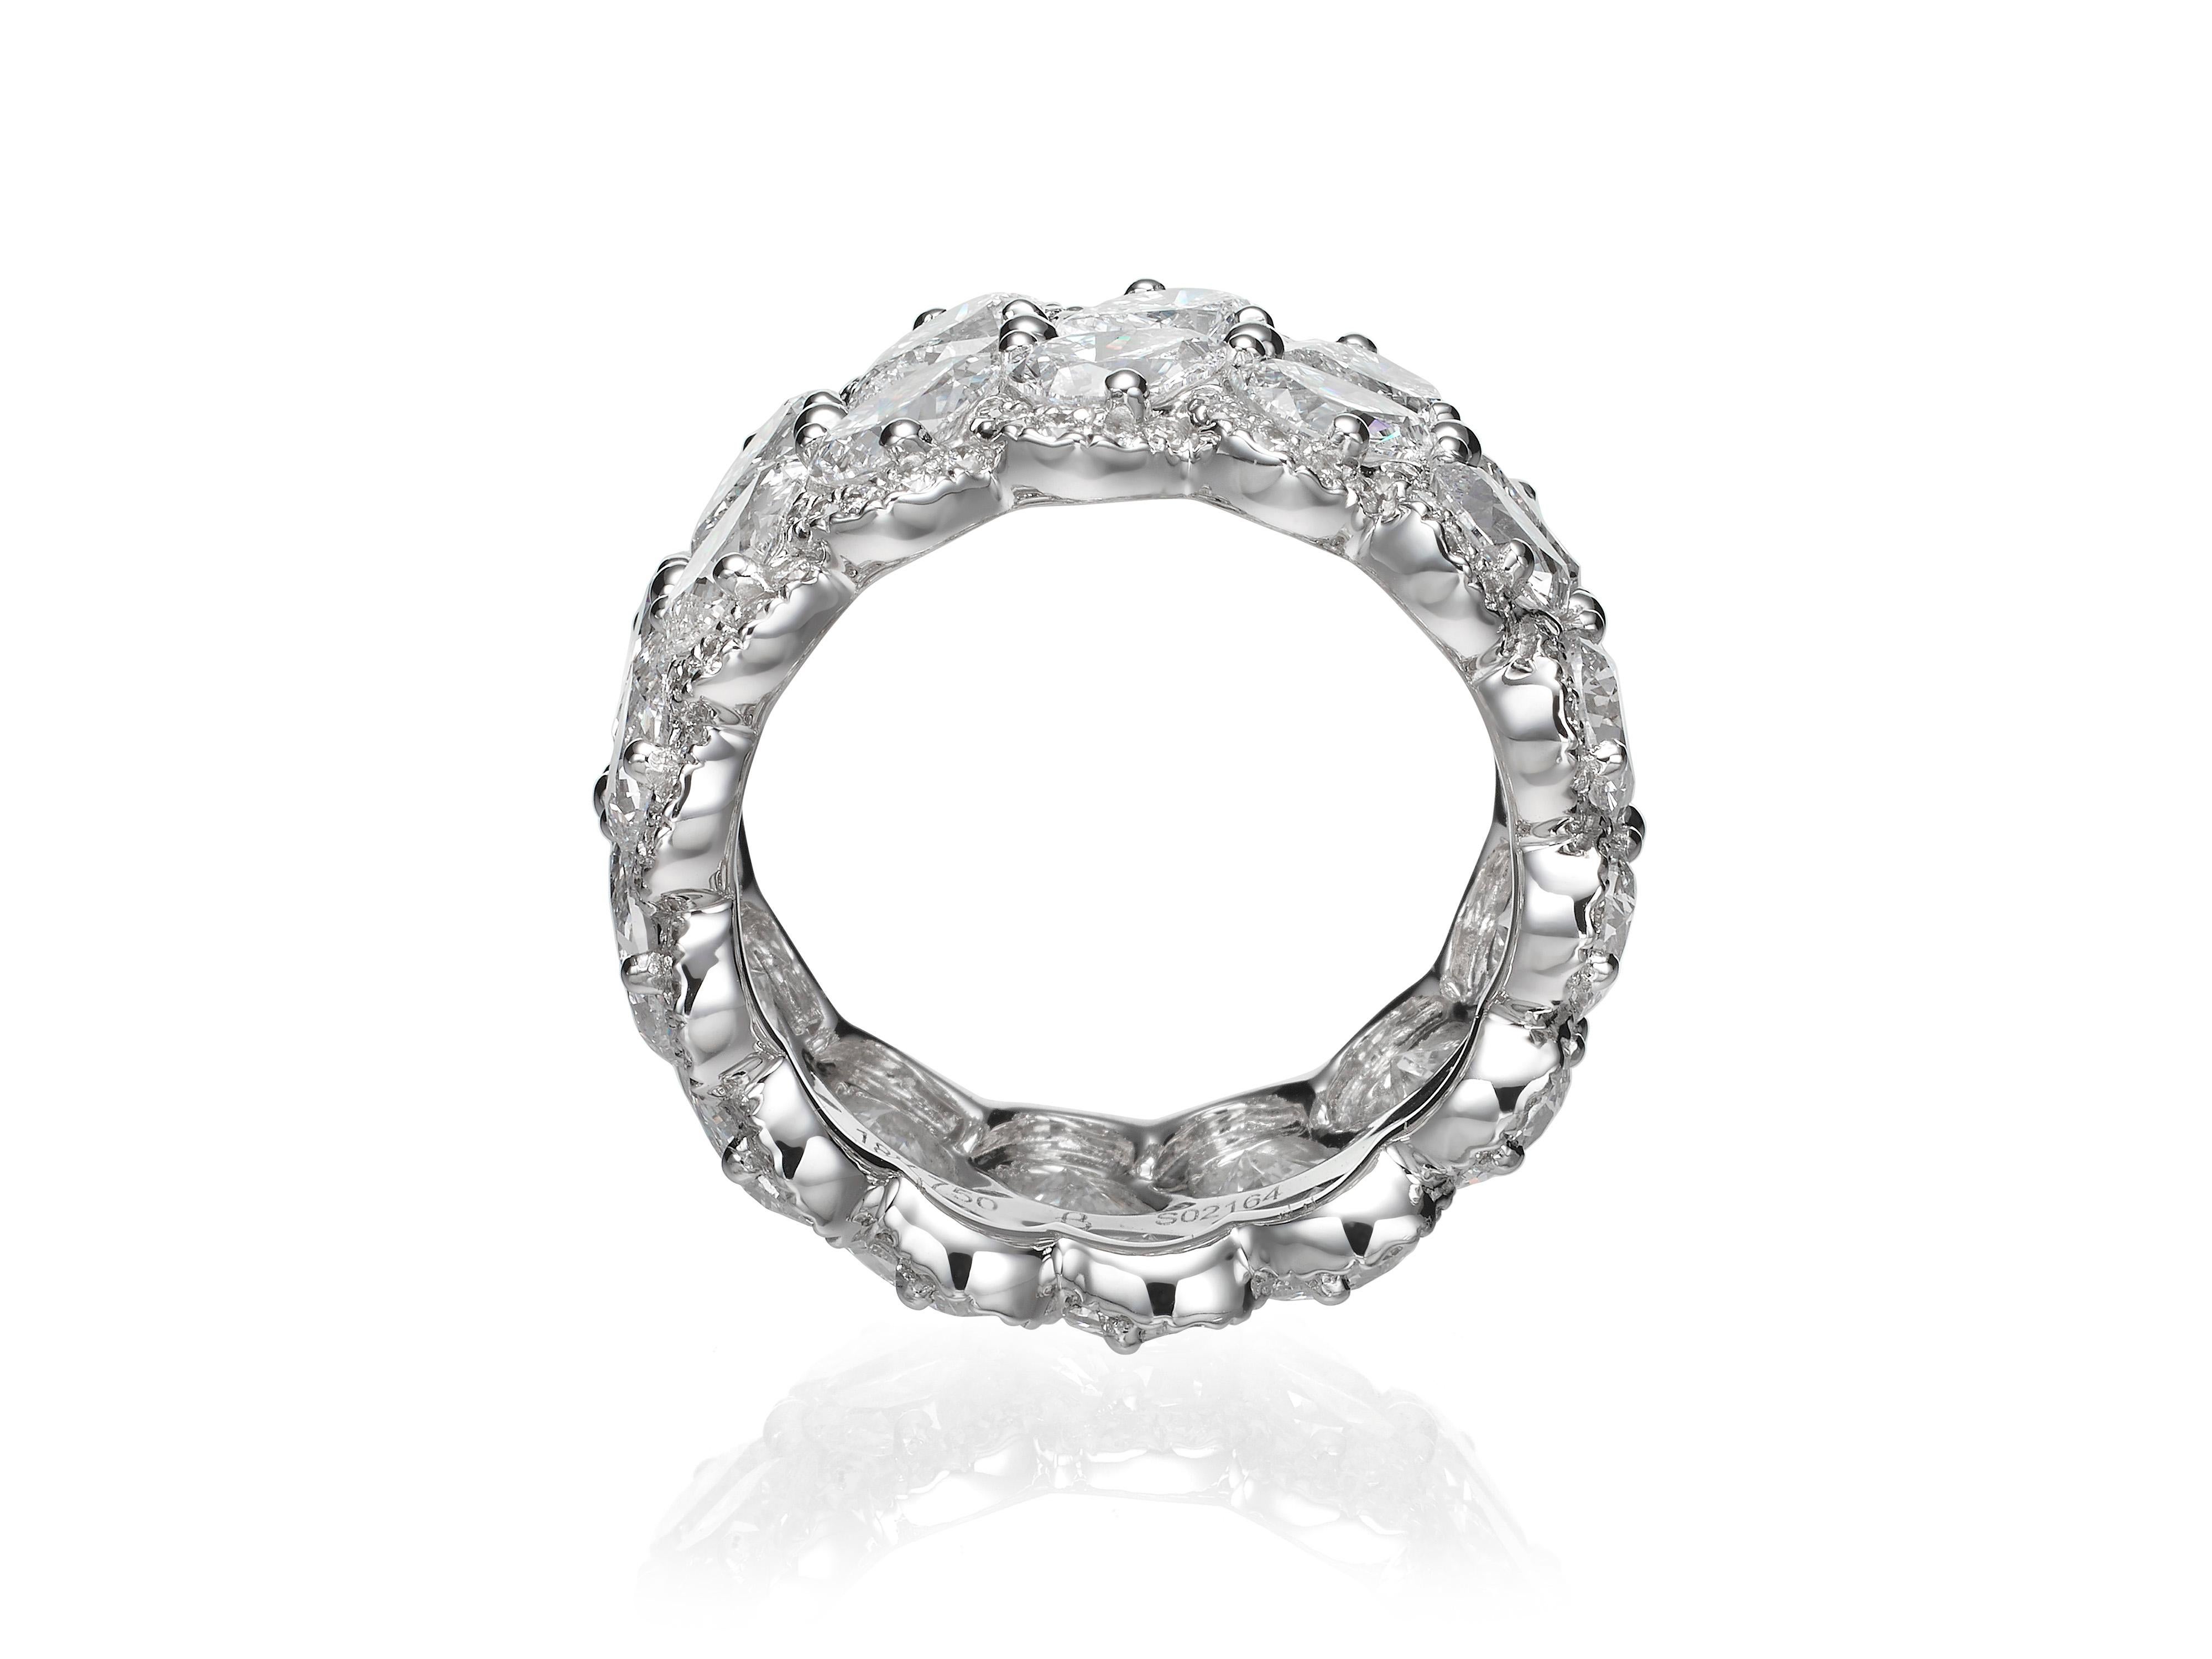 Perfect for an alternative engagement ring or anniversary present, this stunning diamond eternity band ring features two rows of pear-shape diamonds encircled by brilliant pavé-set diamond halos.  Set in 18K white gold.  
Currently a ring size US